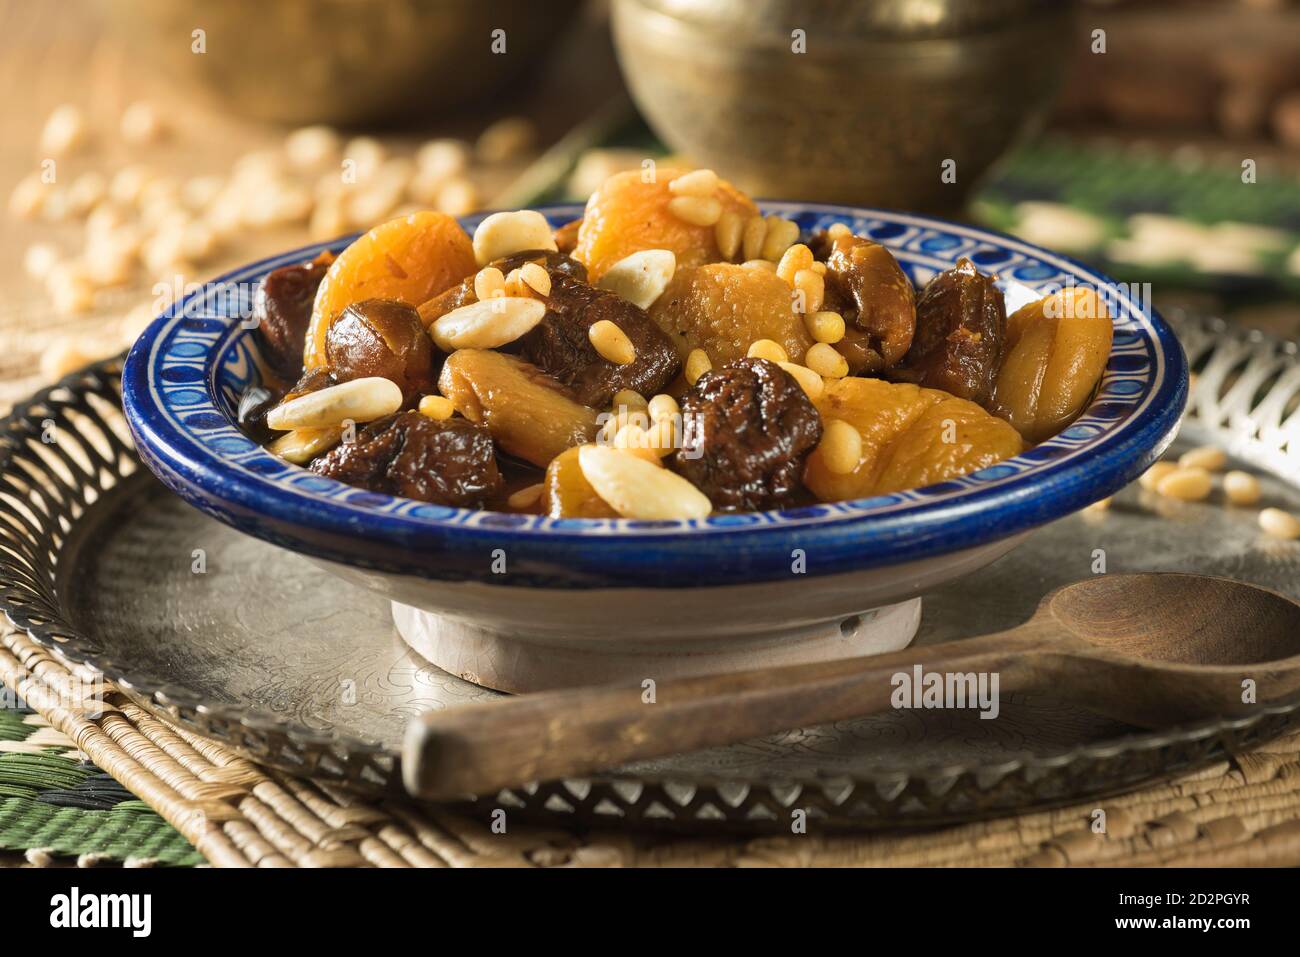 Khoshaf. Dried fruit compote. Middle East Food Stock Photo